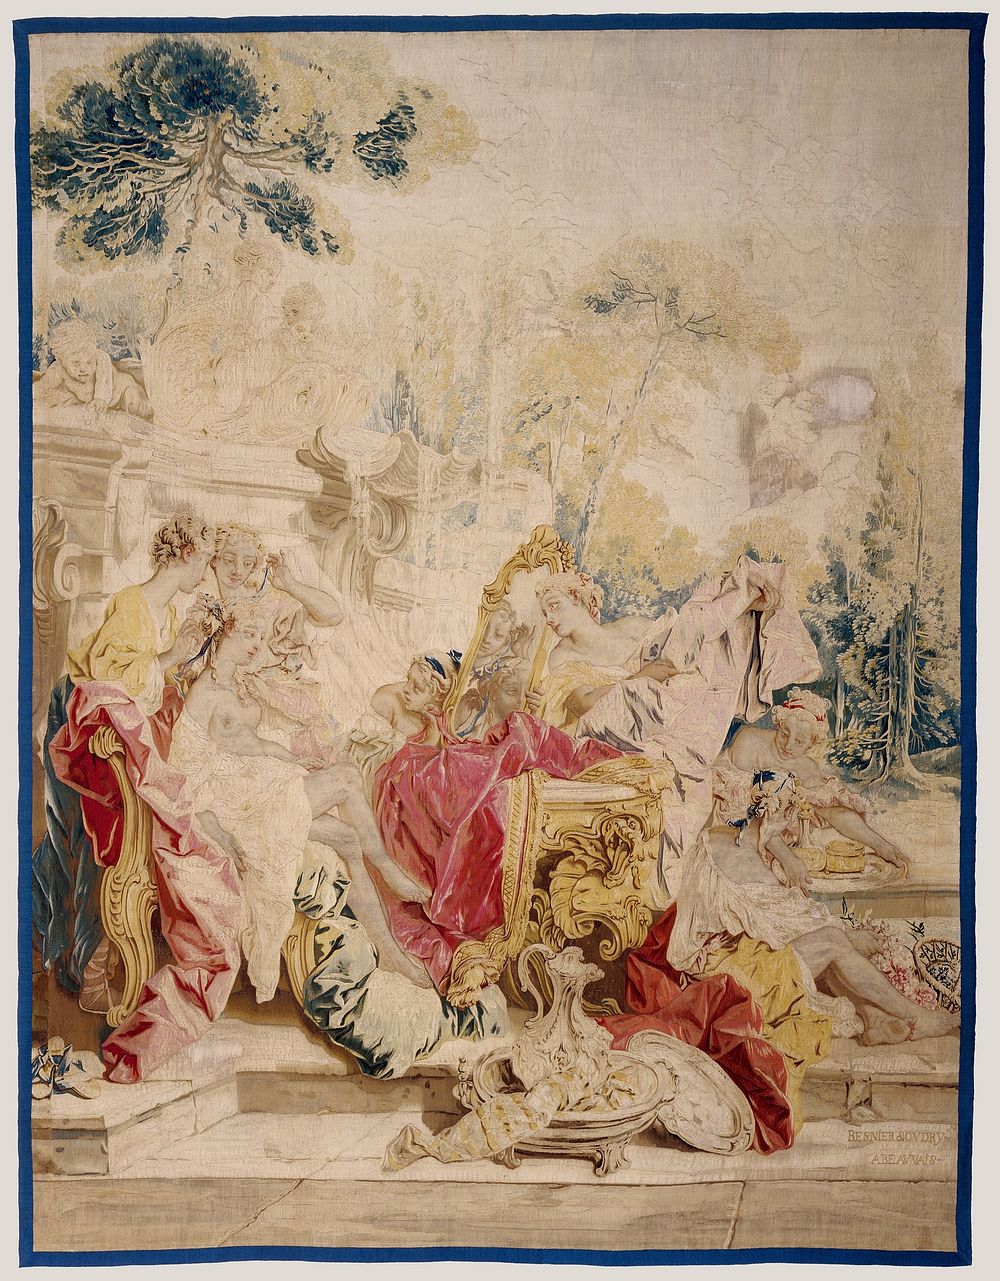 The Toilette of Psyche from The Story of Psyche tapestry series by François Boucher, Nicolas Besnier, Jean Baptiste Oudry…